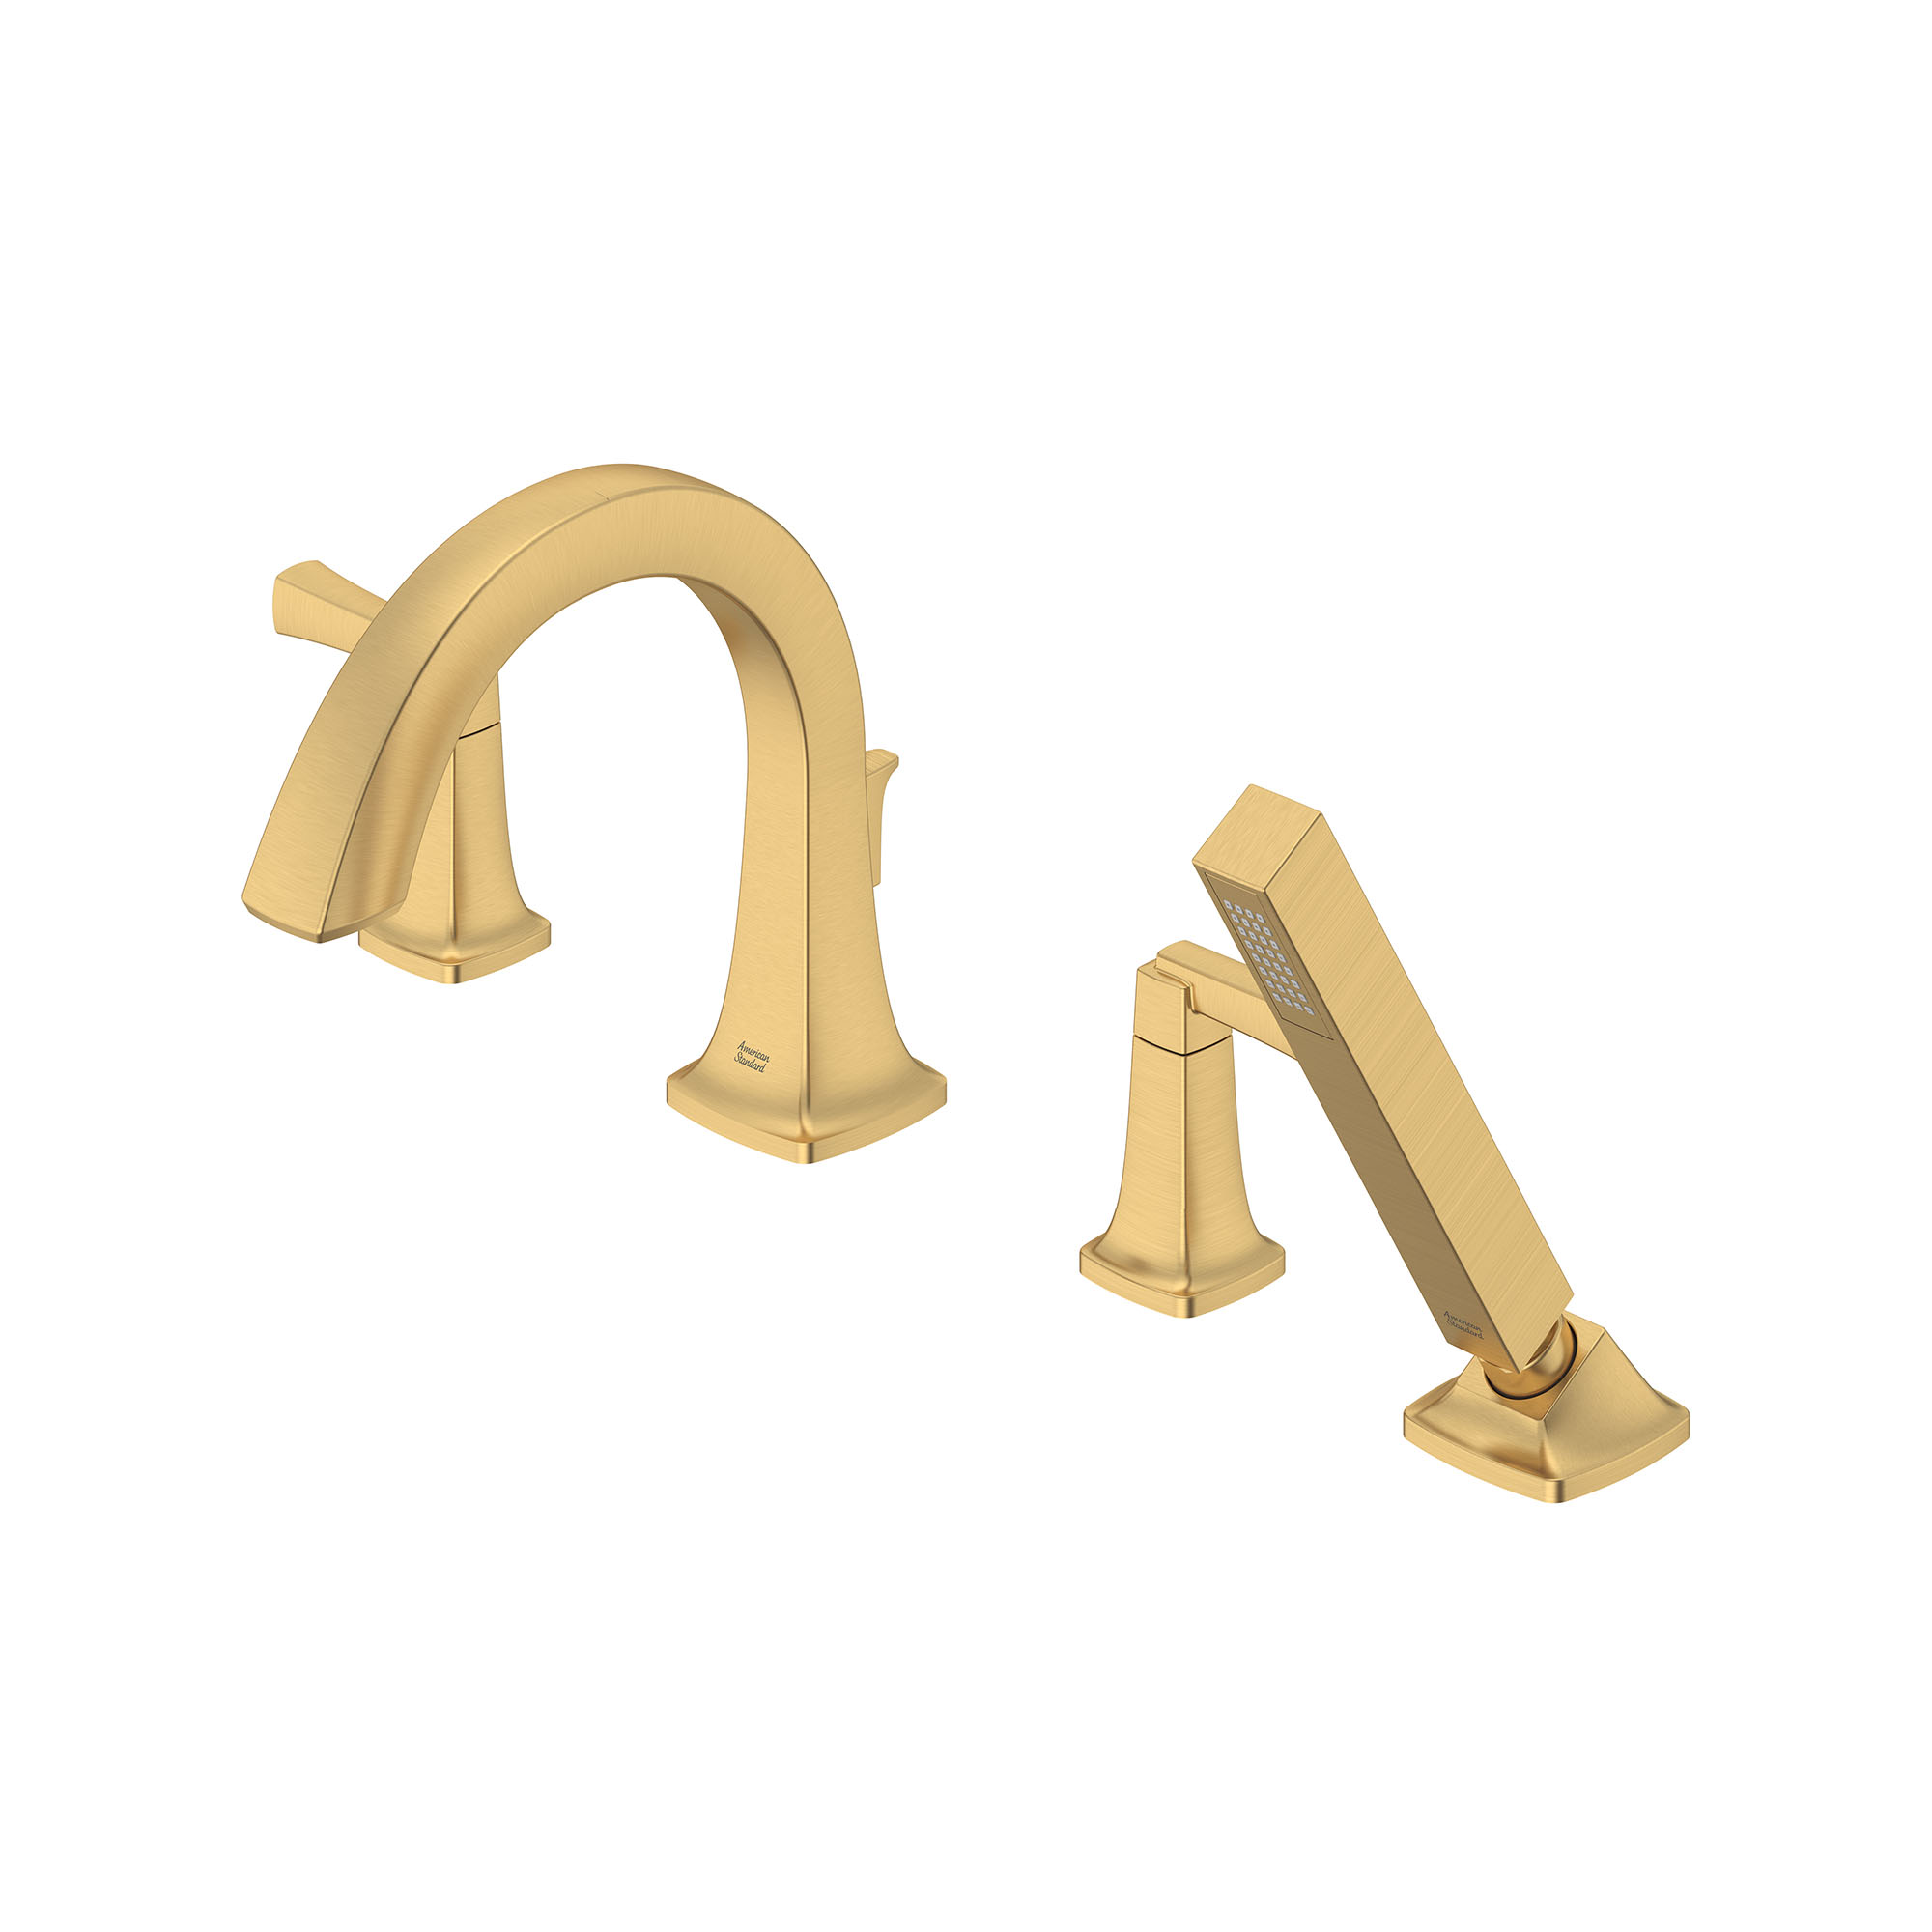 Townsend® Bathtub Faucet With Lever Handles and Personal Shower for Flash® Rough-In Valve